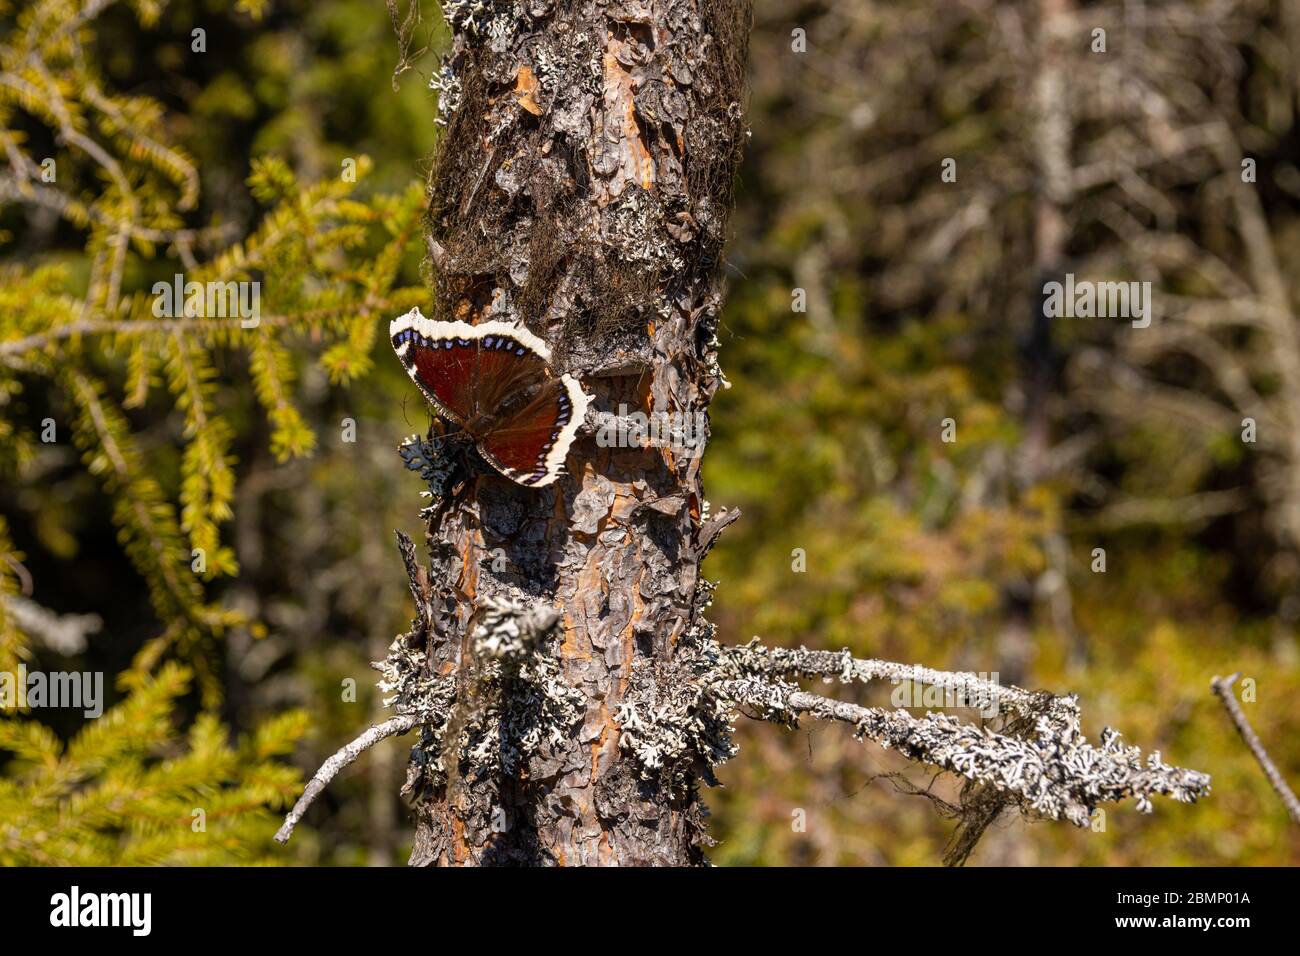 Mourning cloak or Camberwell beauty butterfly (nymphalis antiopa) on a pine tree trunk in the sun, picture from Mellansel Vasternorrland, Sweden. Stock Photo